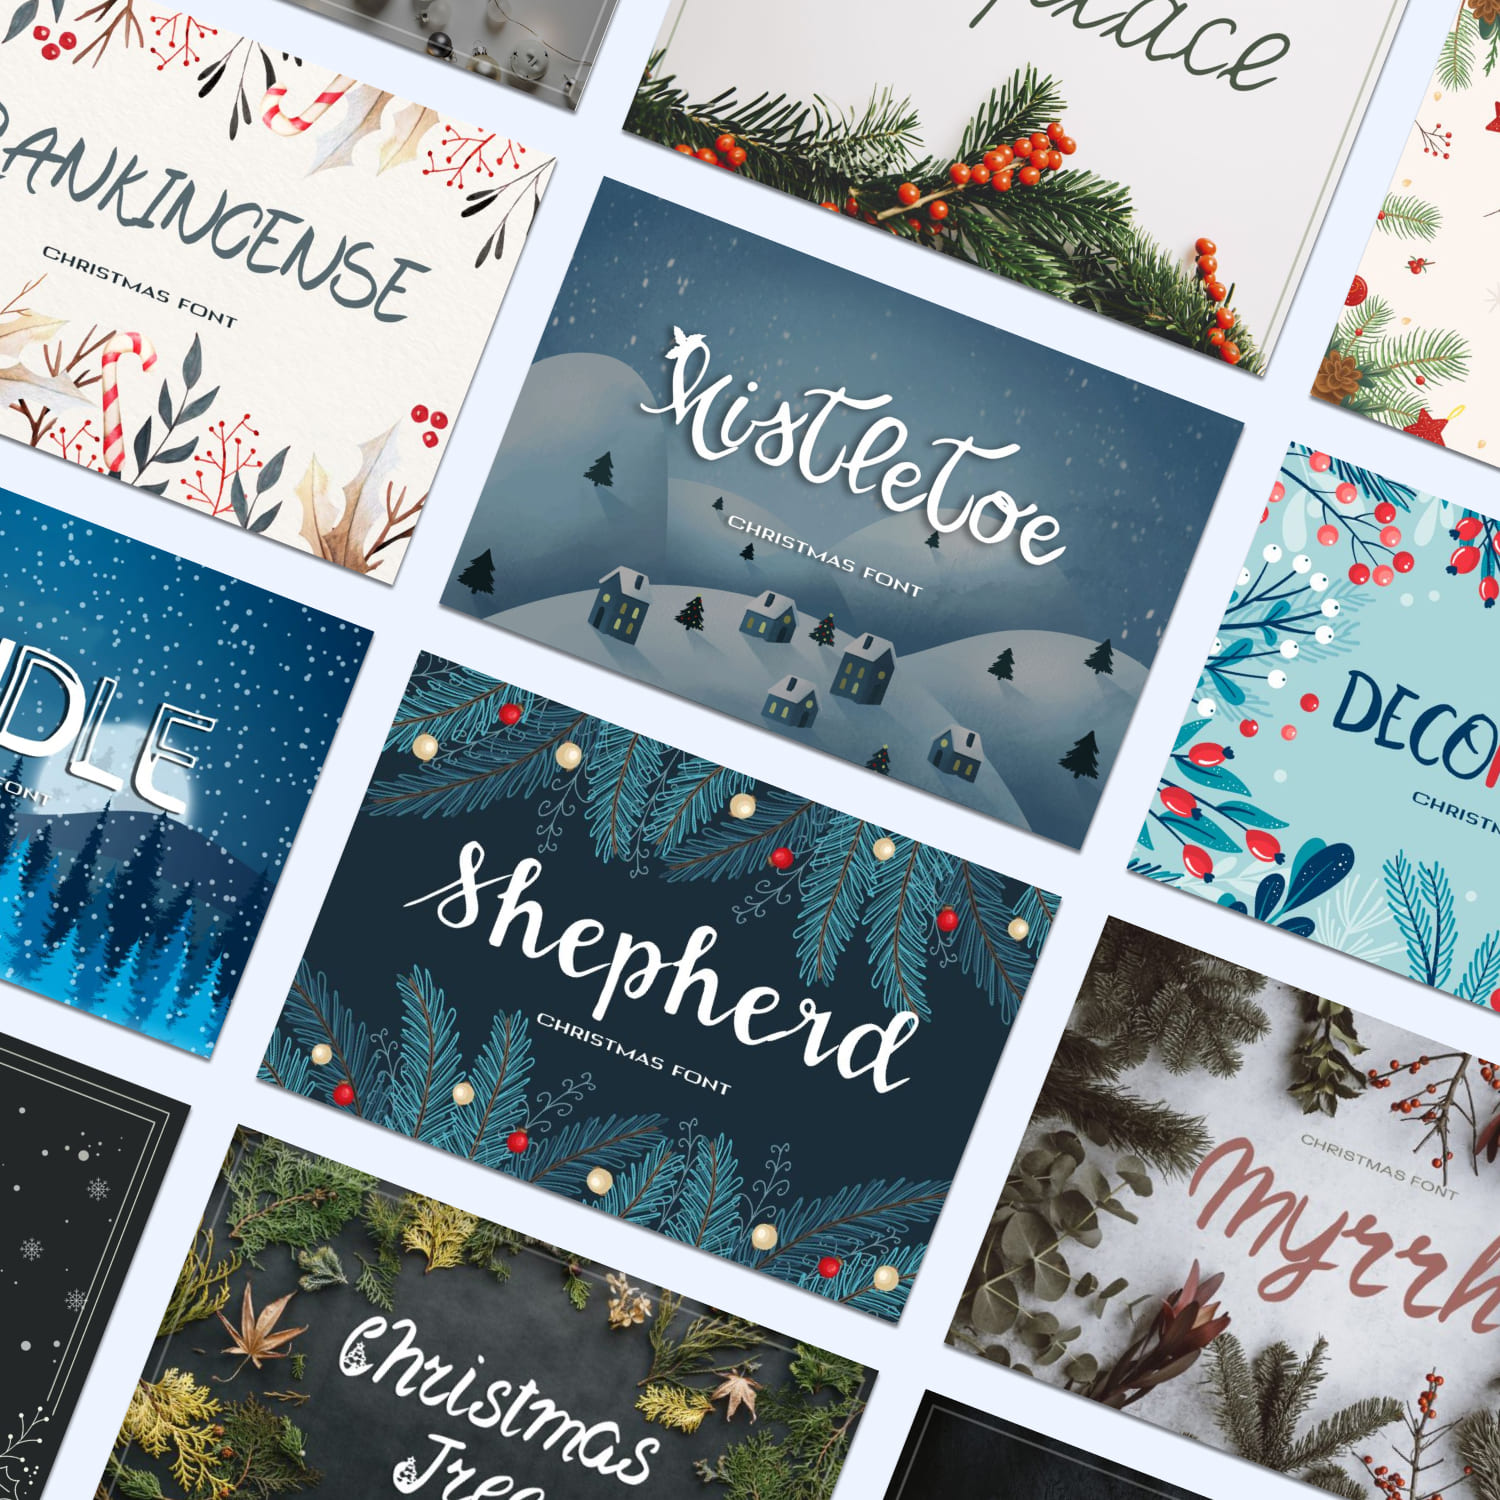 25 Christmas Fonts cover.